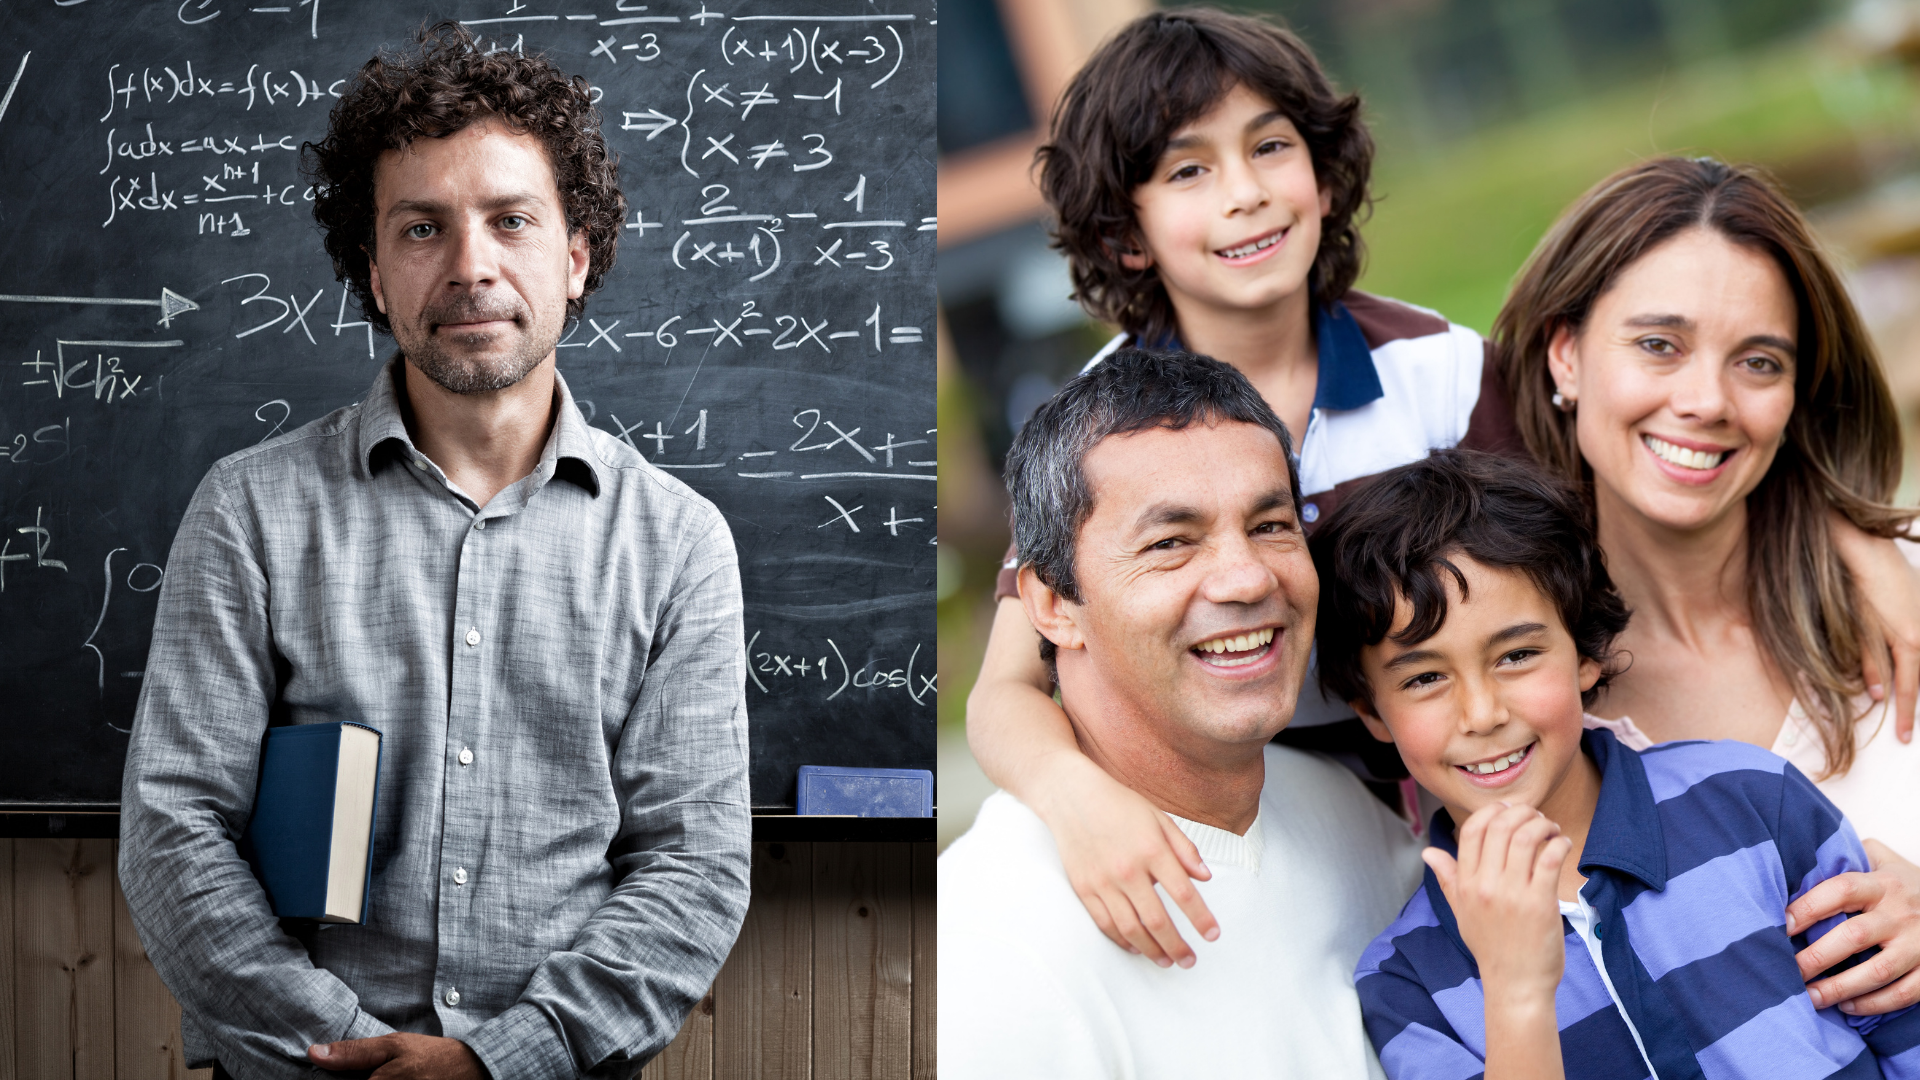 two photos - one of teacher in front of a blackboard and one of a happy family with two children